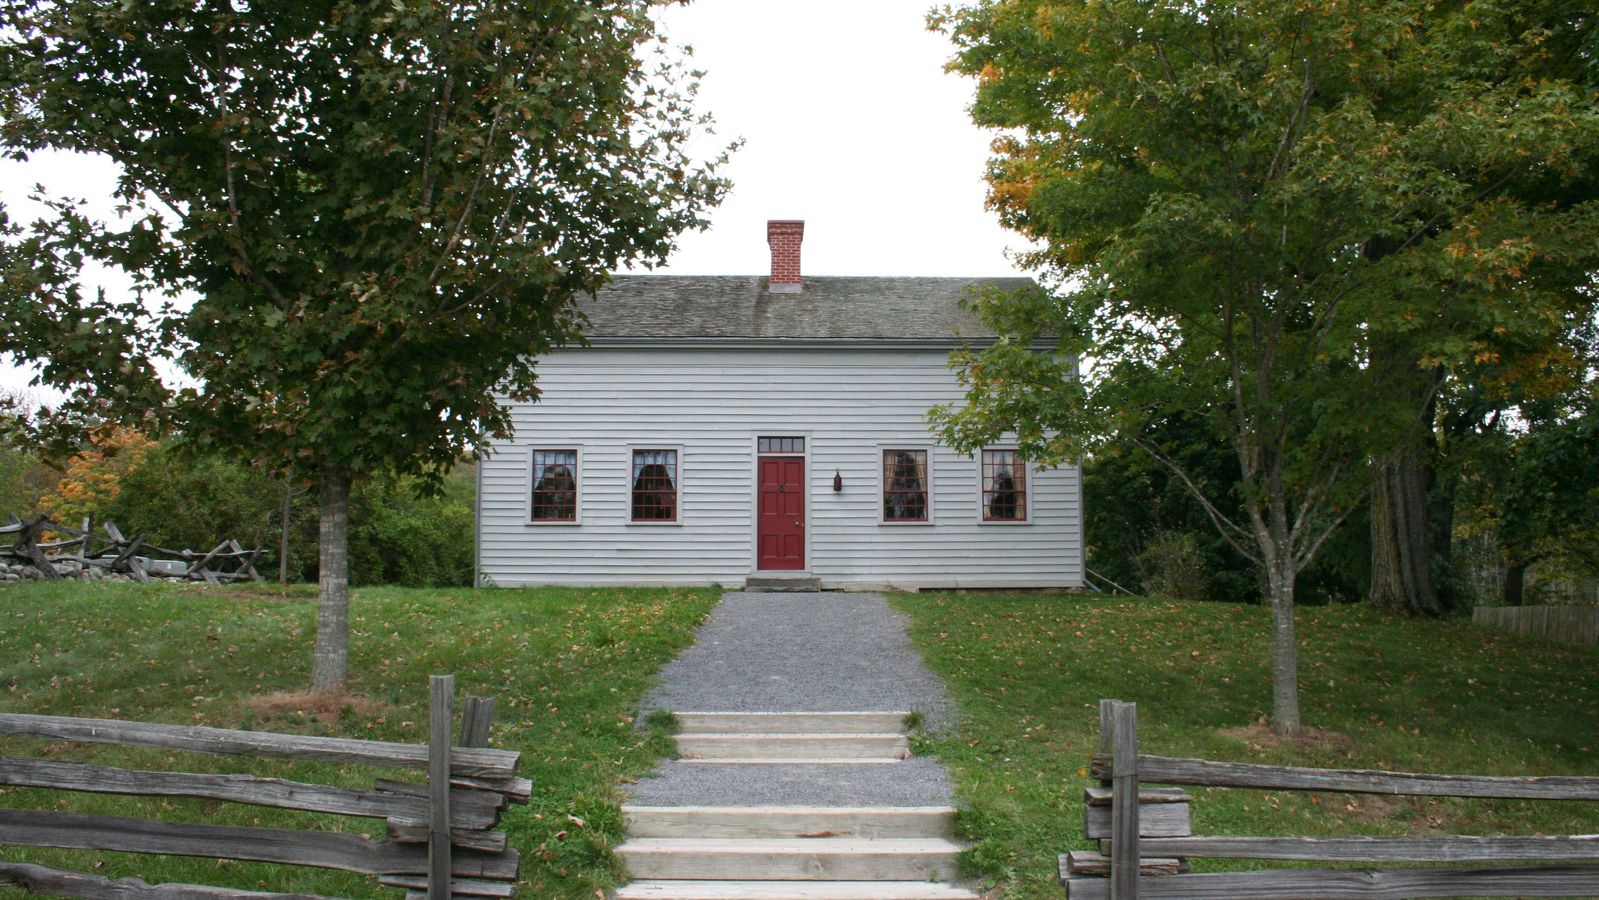 Exterior of the Smith frame house in Manchester, New York.